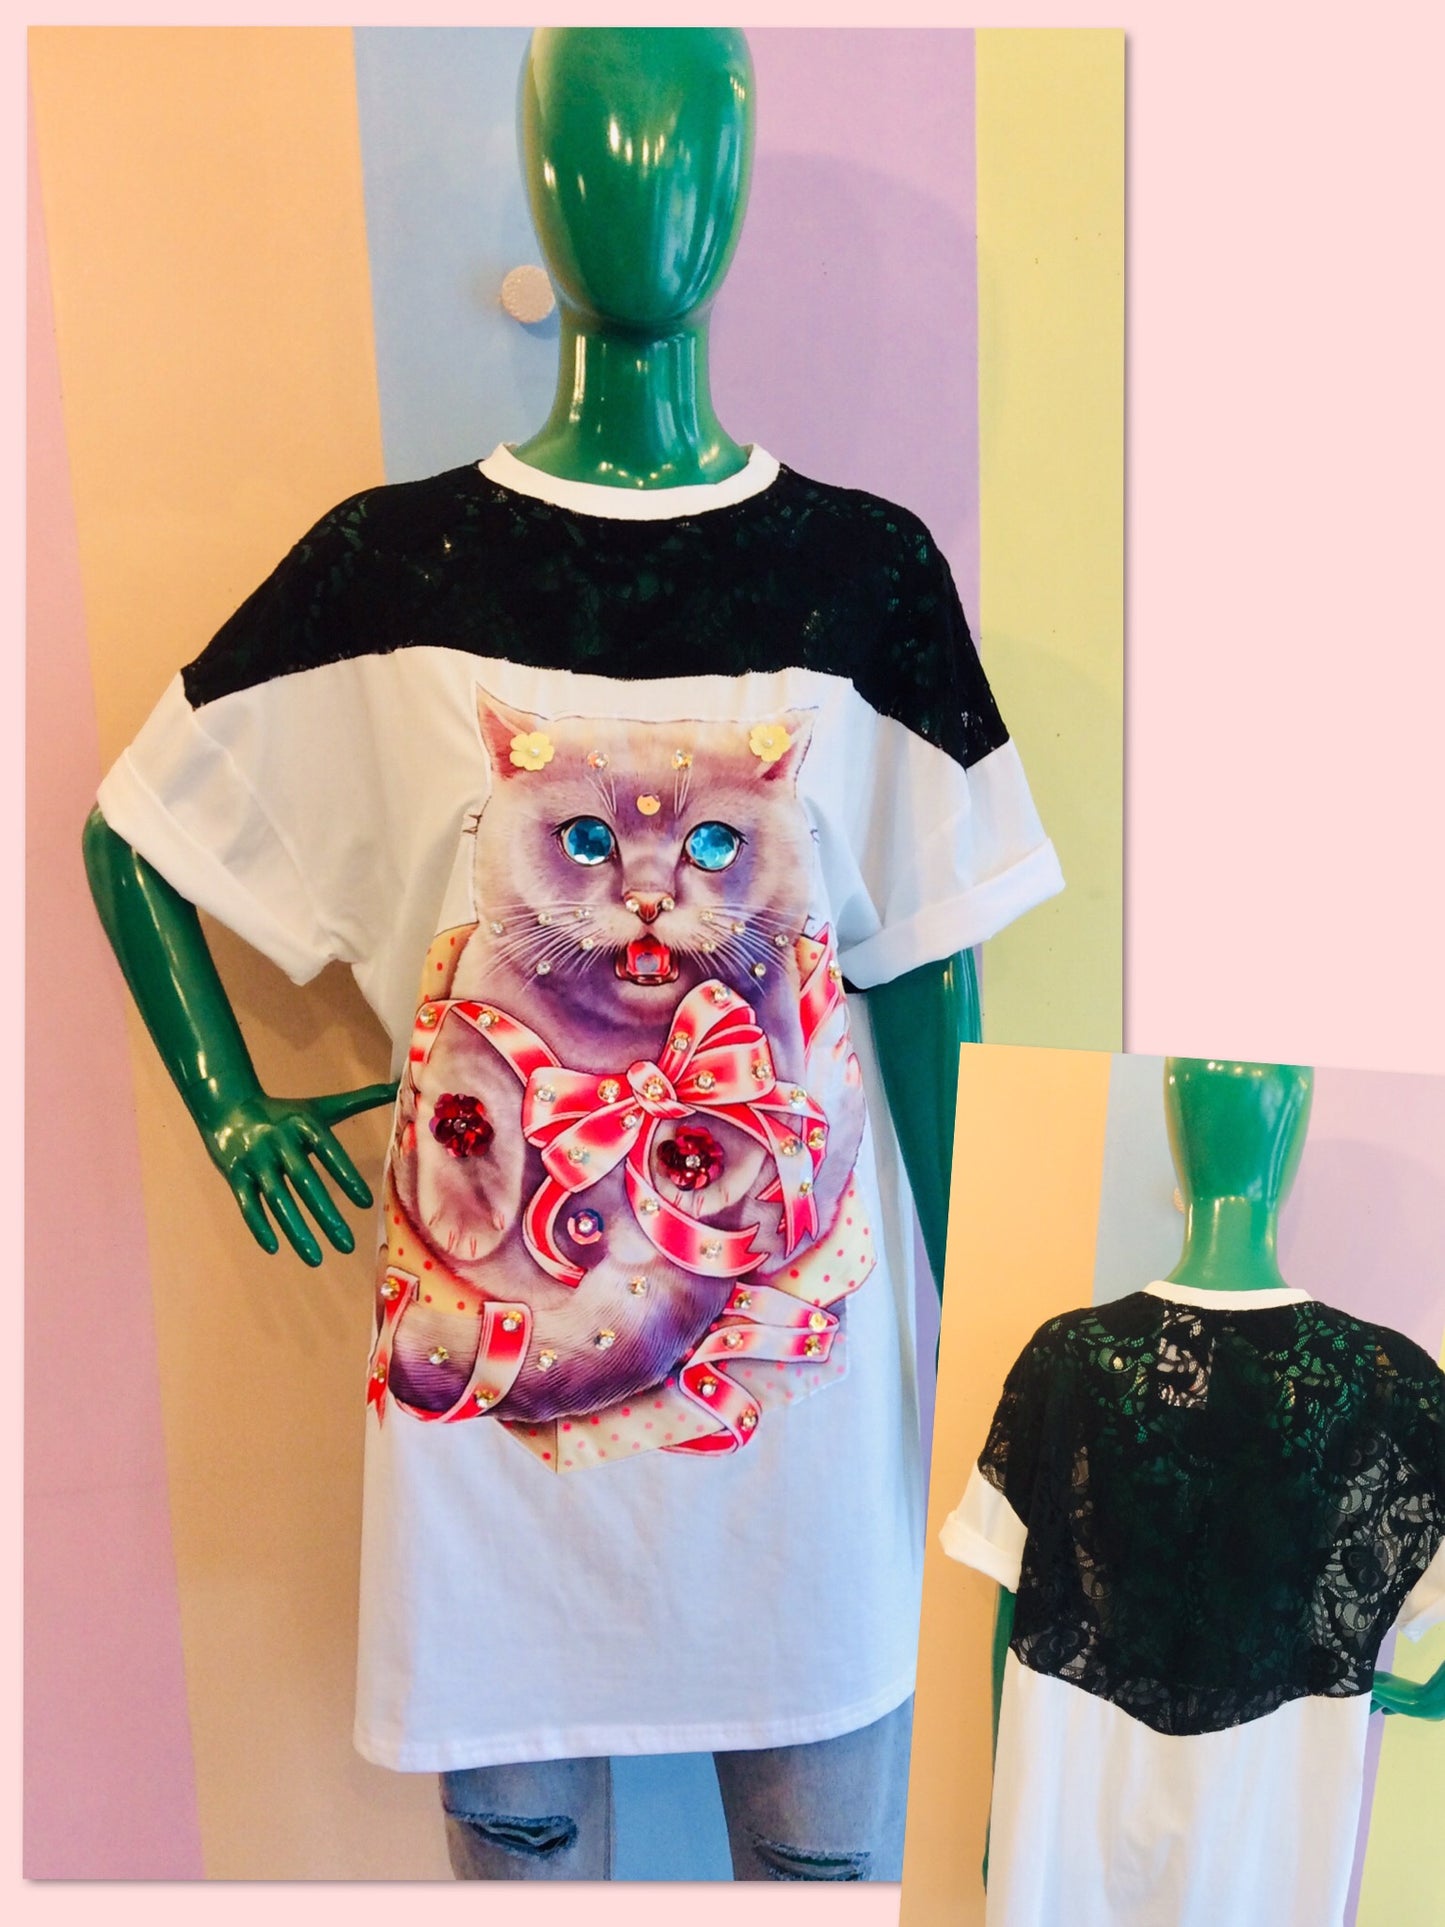 Cotton & Sexy Back Lace Kitty Oversize Tee w/ Gems...